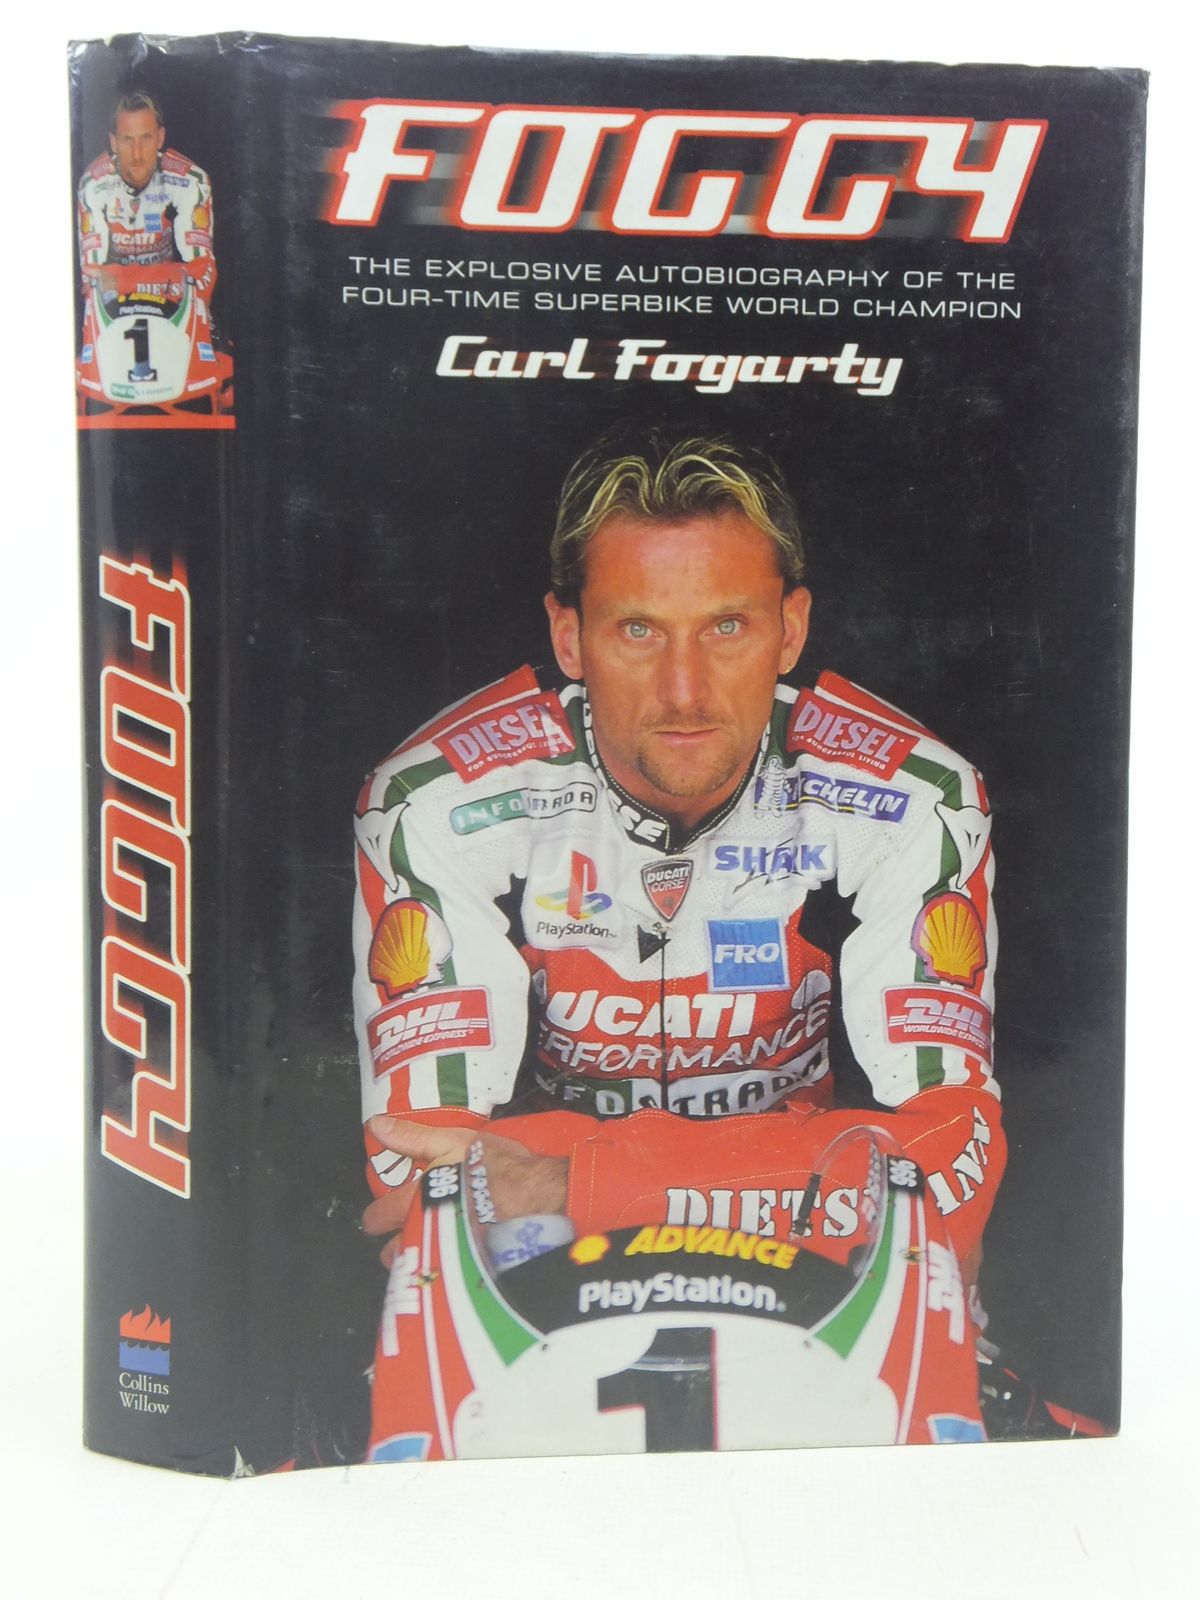 Photo of FOGGY THE EXPLOSIVE AUTOBIOGRAPHY OF THE FOUR-TIME SUPERBIKE WORLD CHAMPION written by Fogarty, Carl Bramwell, Neil published by Collins Willow (STOCK CODE: 1606189)  for sale by Stella & Rose's Books